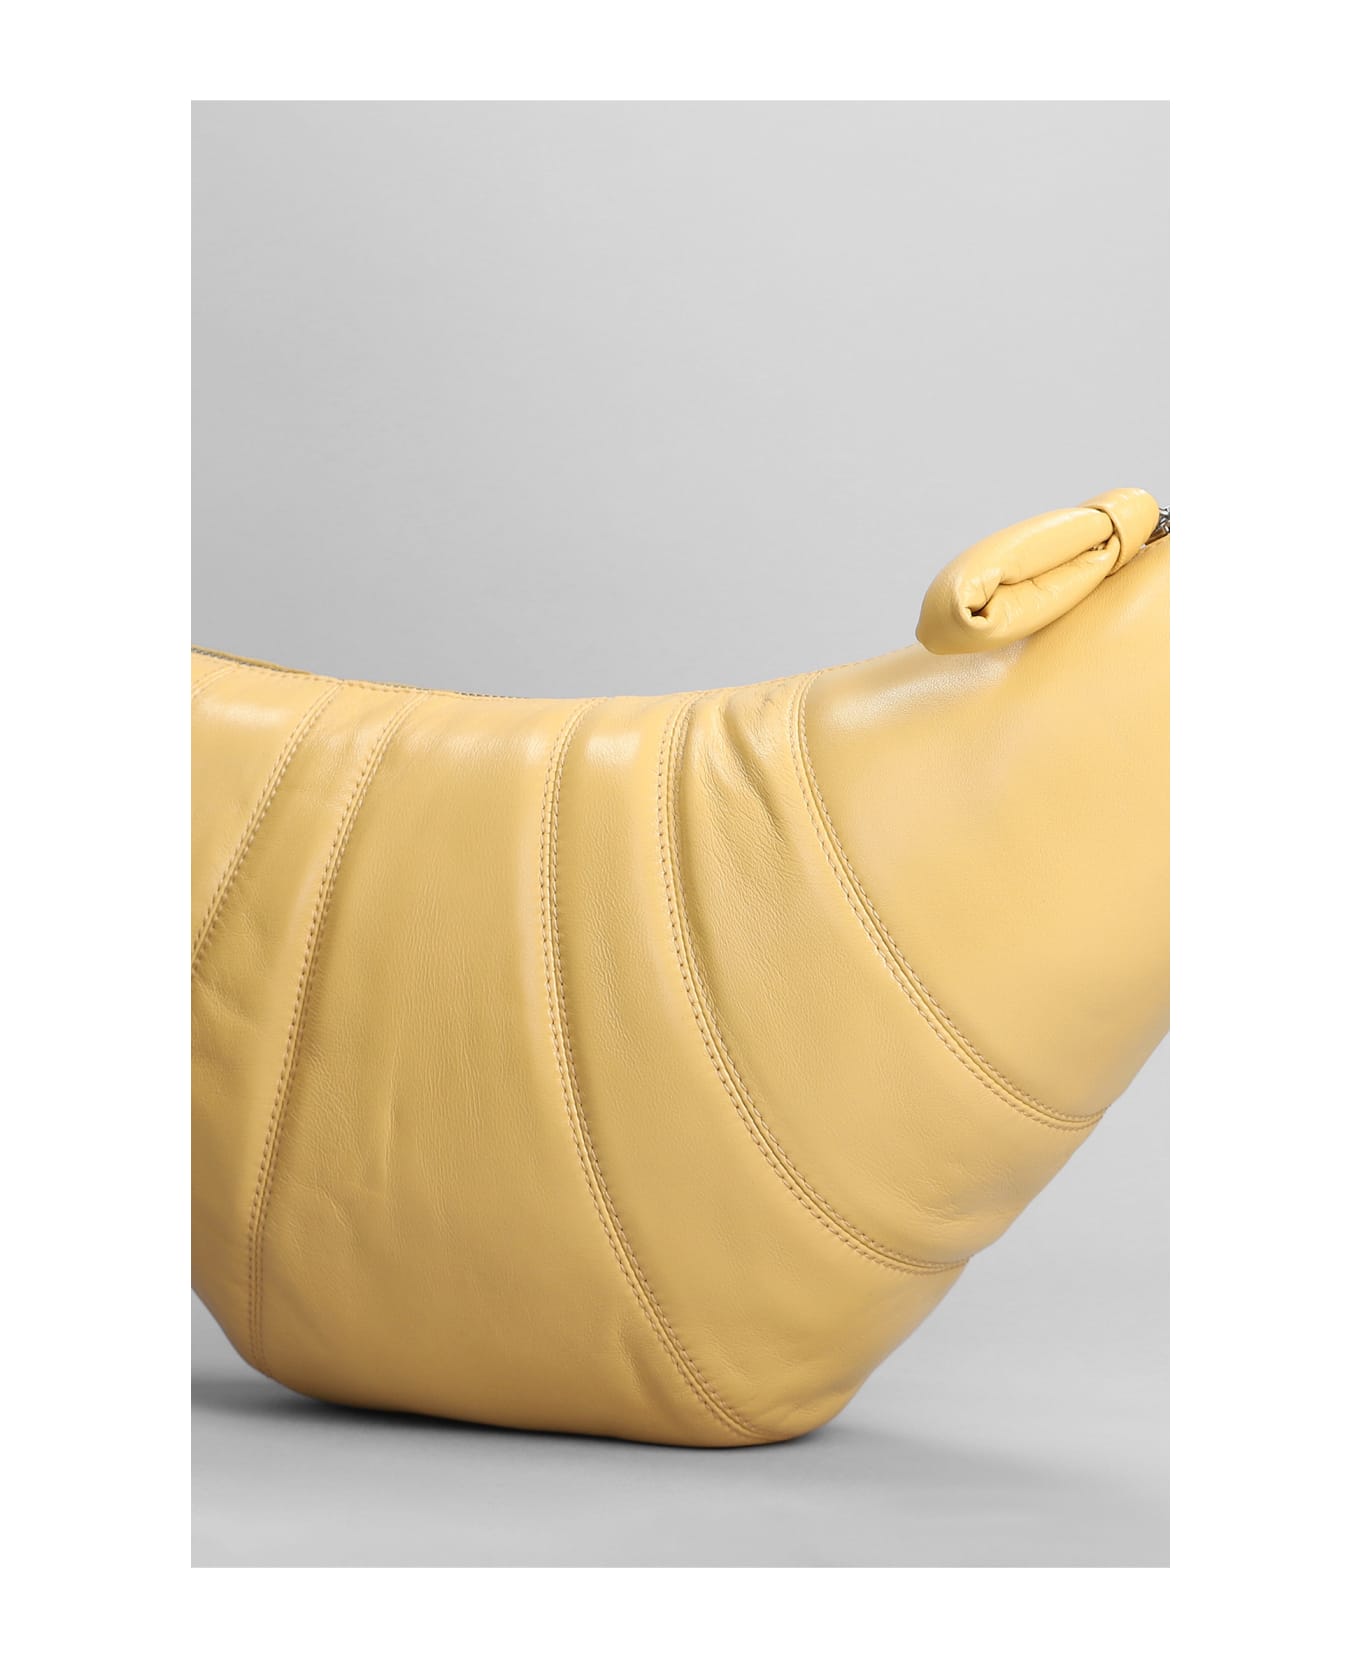 Lemaire Meduim Croissant Shoulder Bag In Yellow Leather - Butter トートバッグ